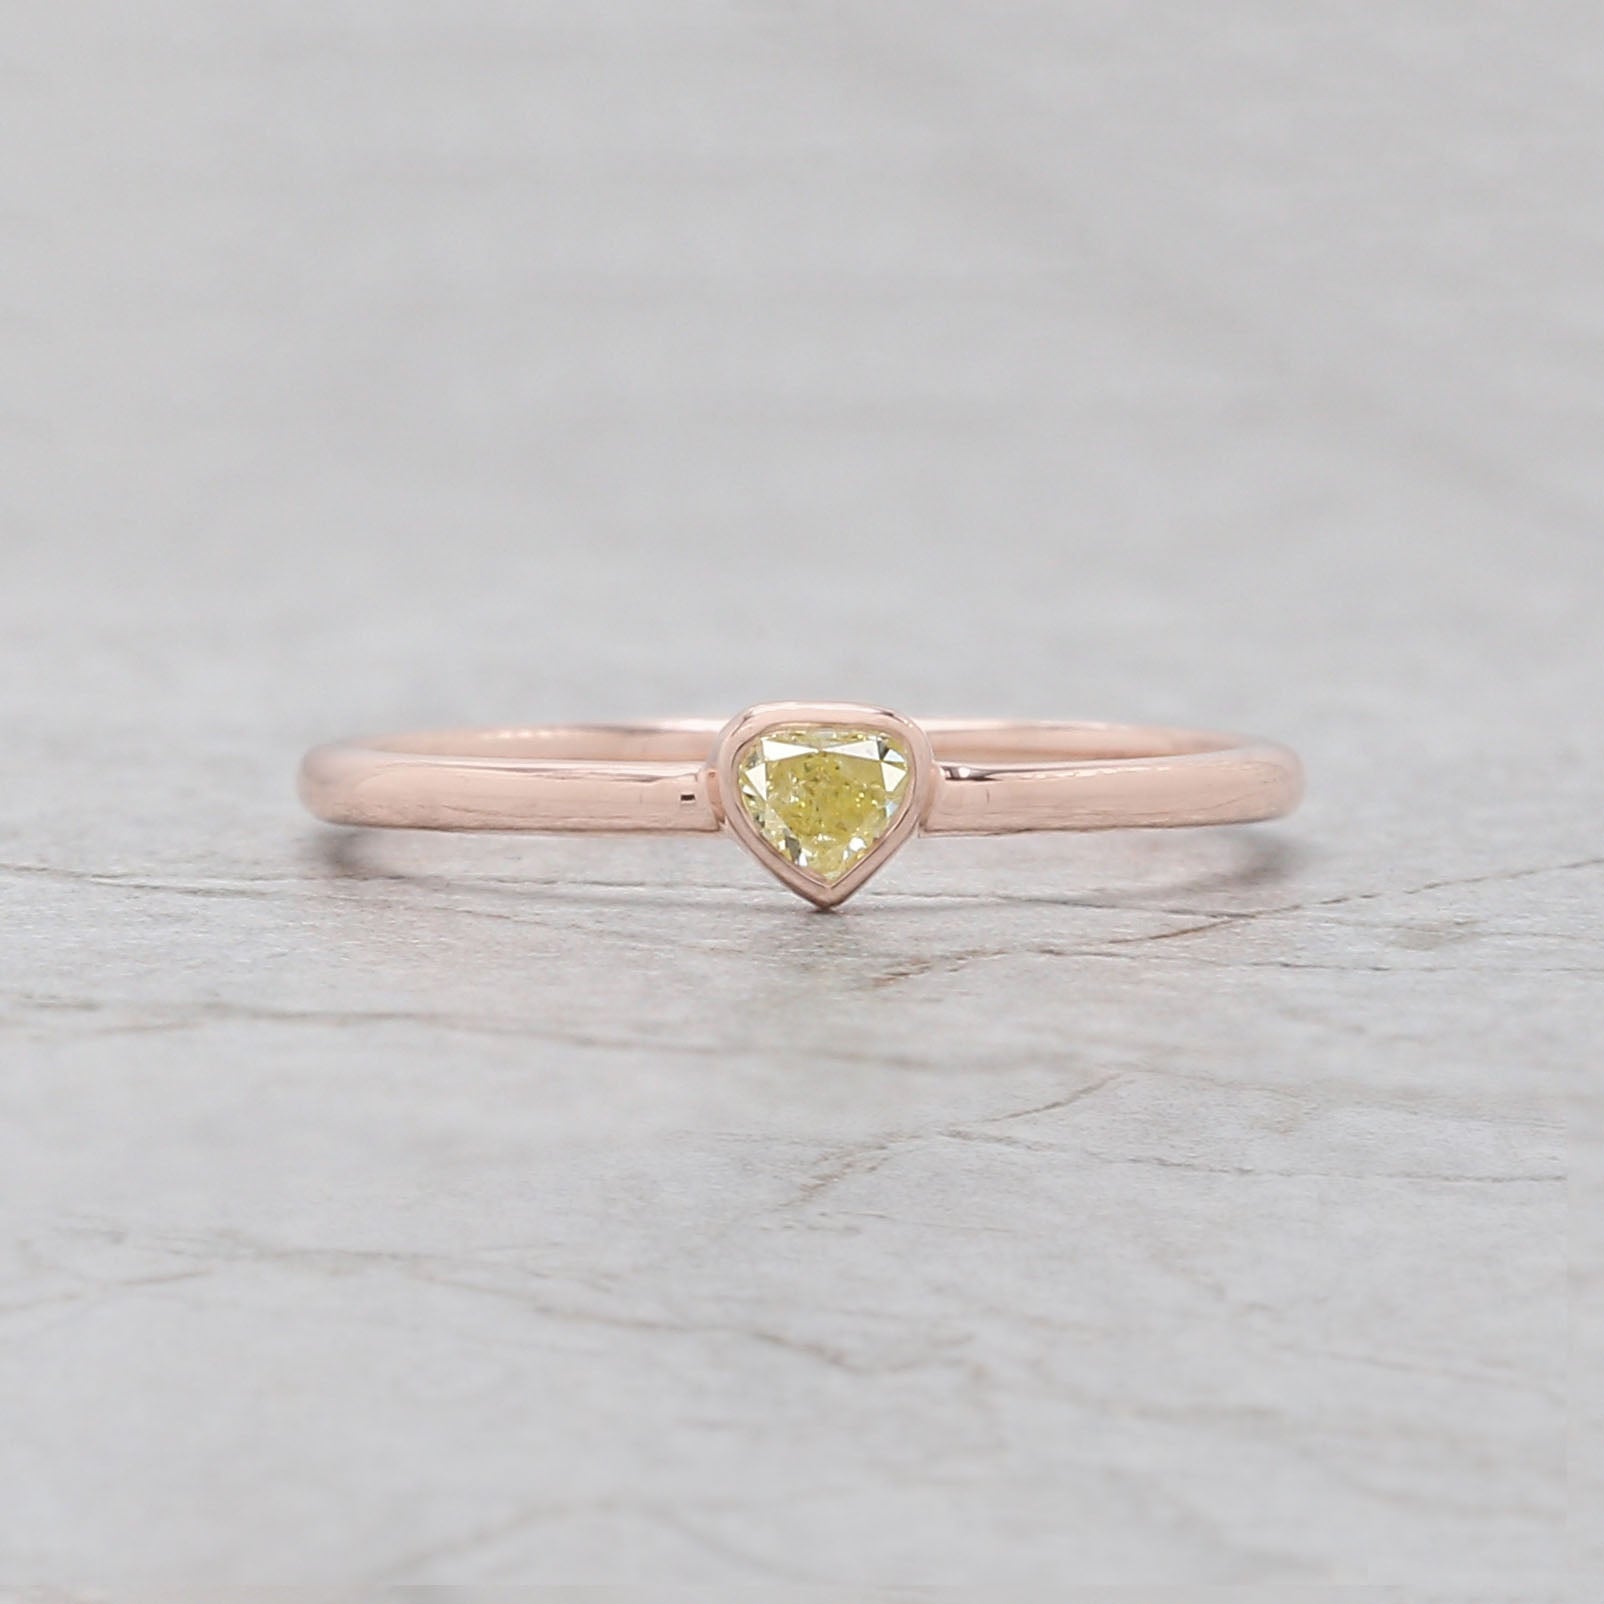 Heart Yellow Color Diamond Ring Engagement Wedding Gift Ring 14K Solid Rose White Yellow Gold Ring 0.14 CT KDN7386